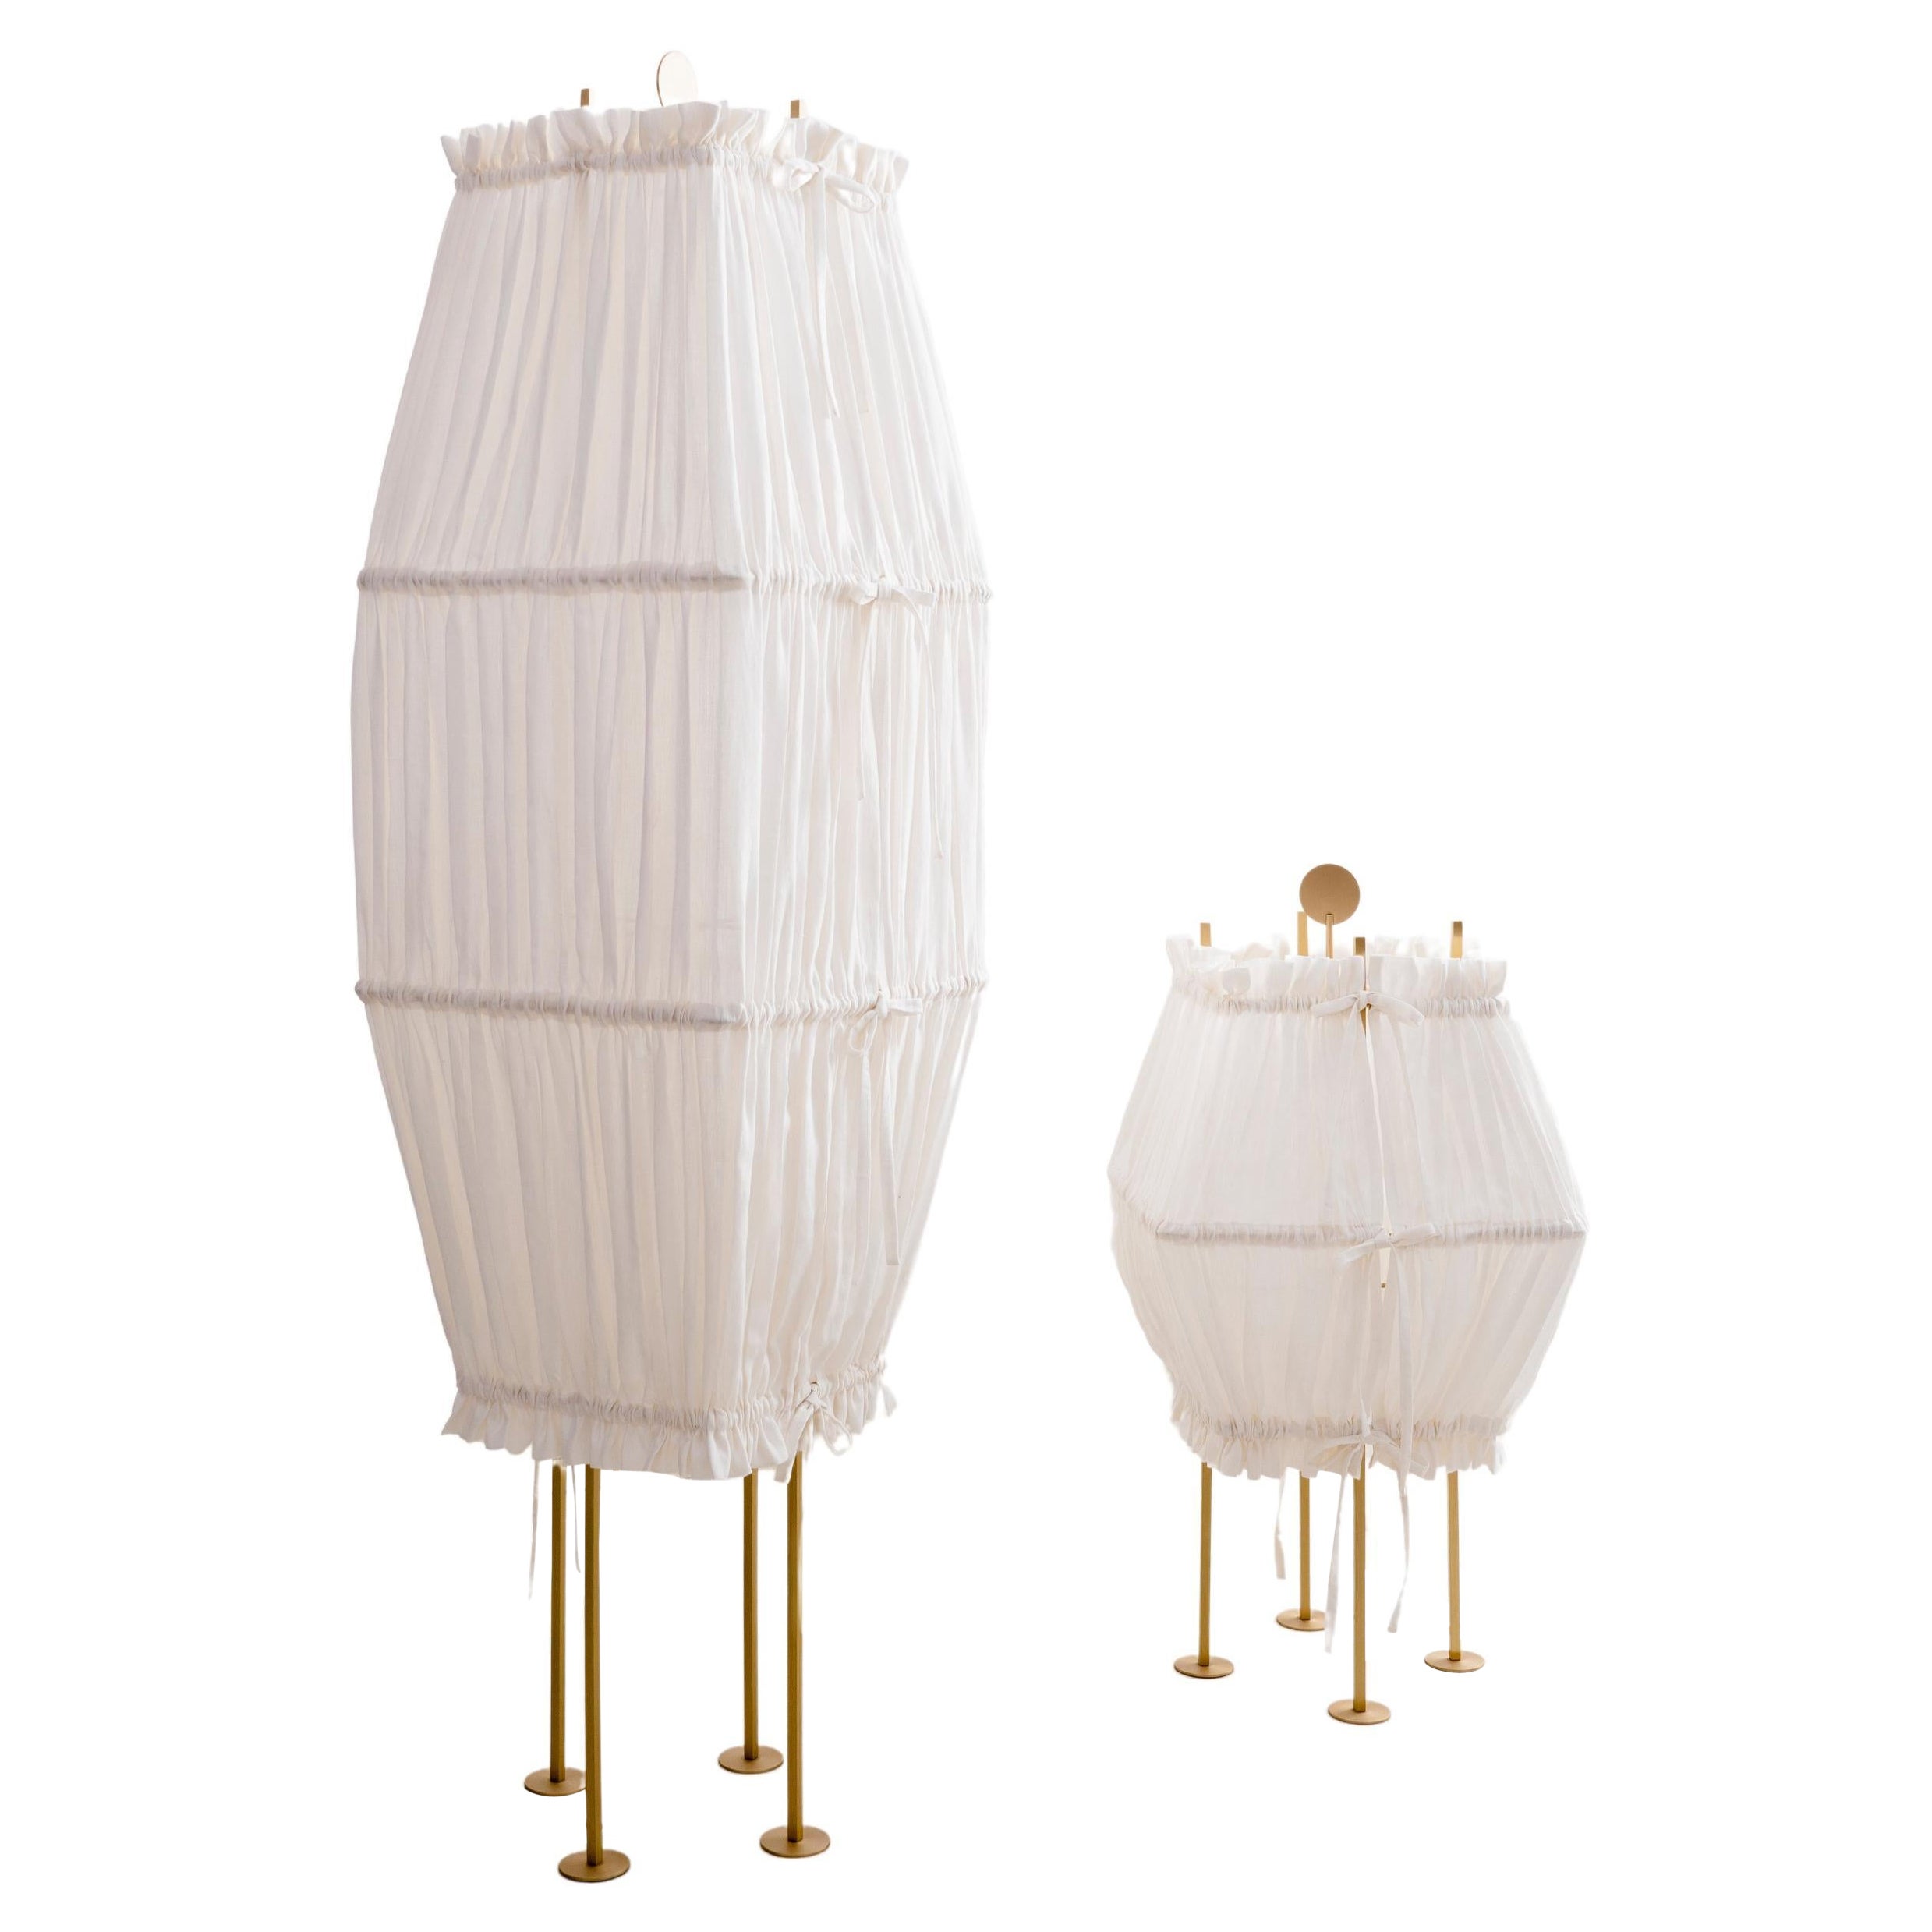 Set of 2 Presenza Floor Lamps by Agustina Bottoni For Sale